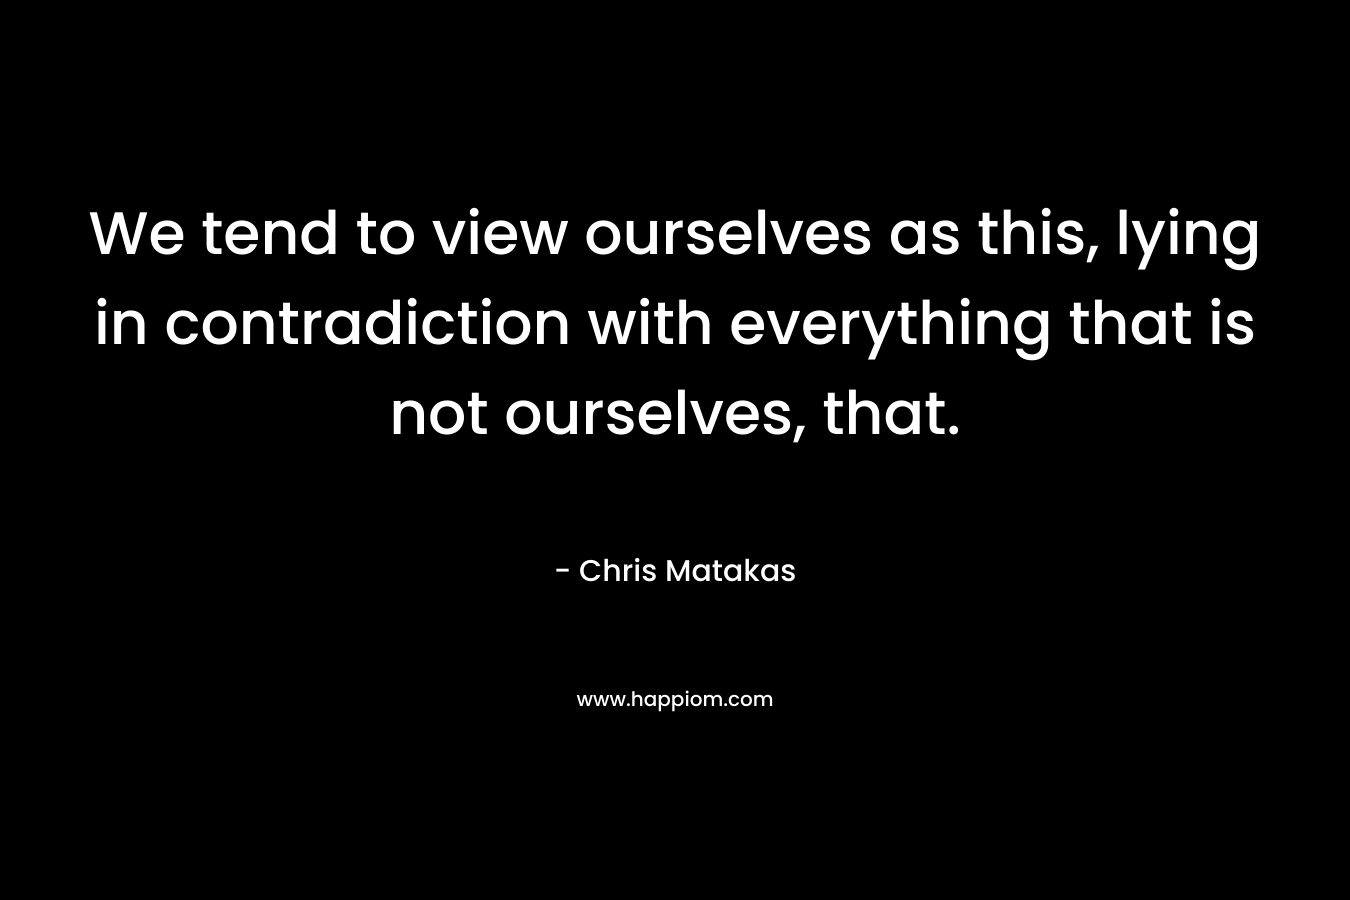 We tend to view ourselves as this, lying in contradiction with everything that is not ourselves, that.